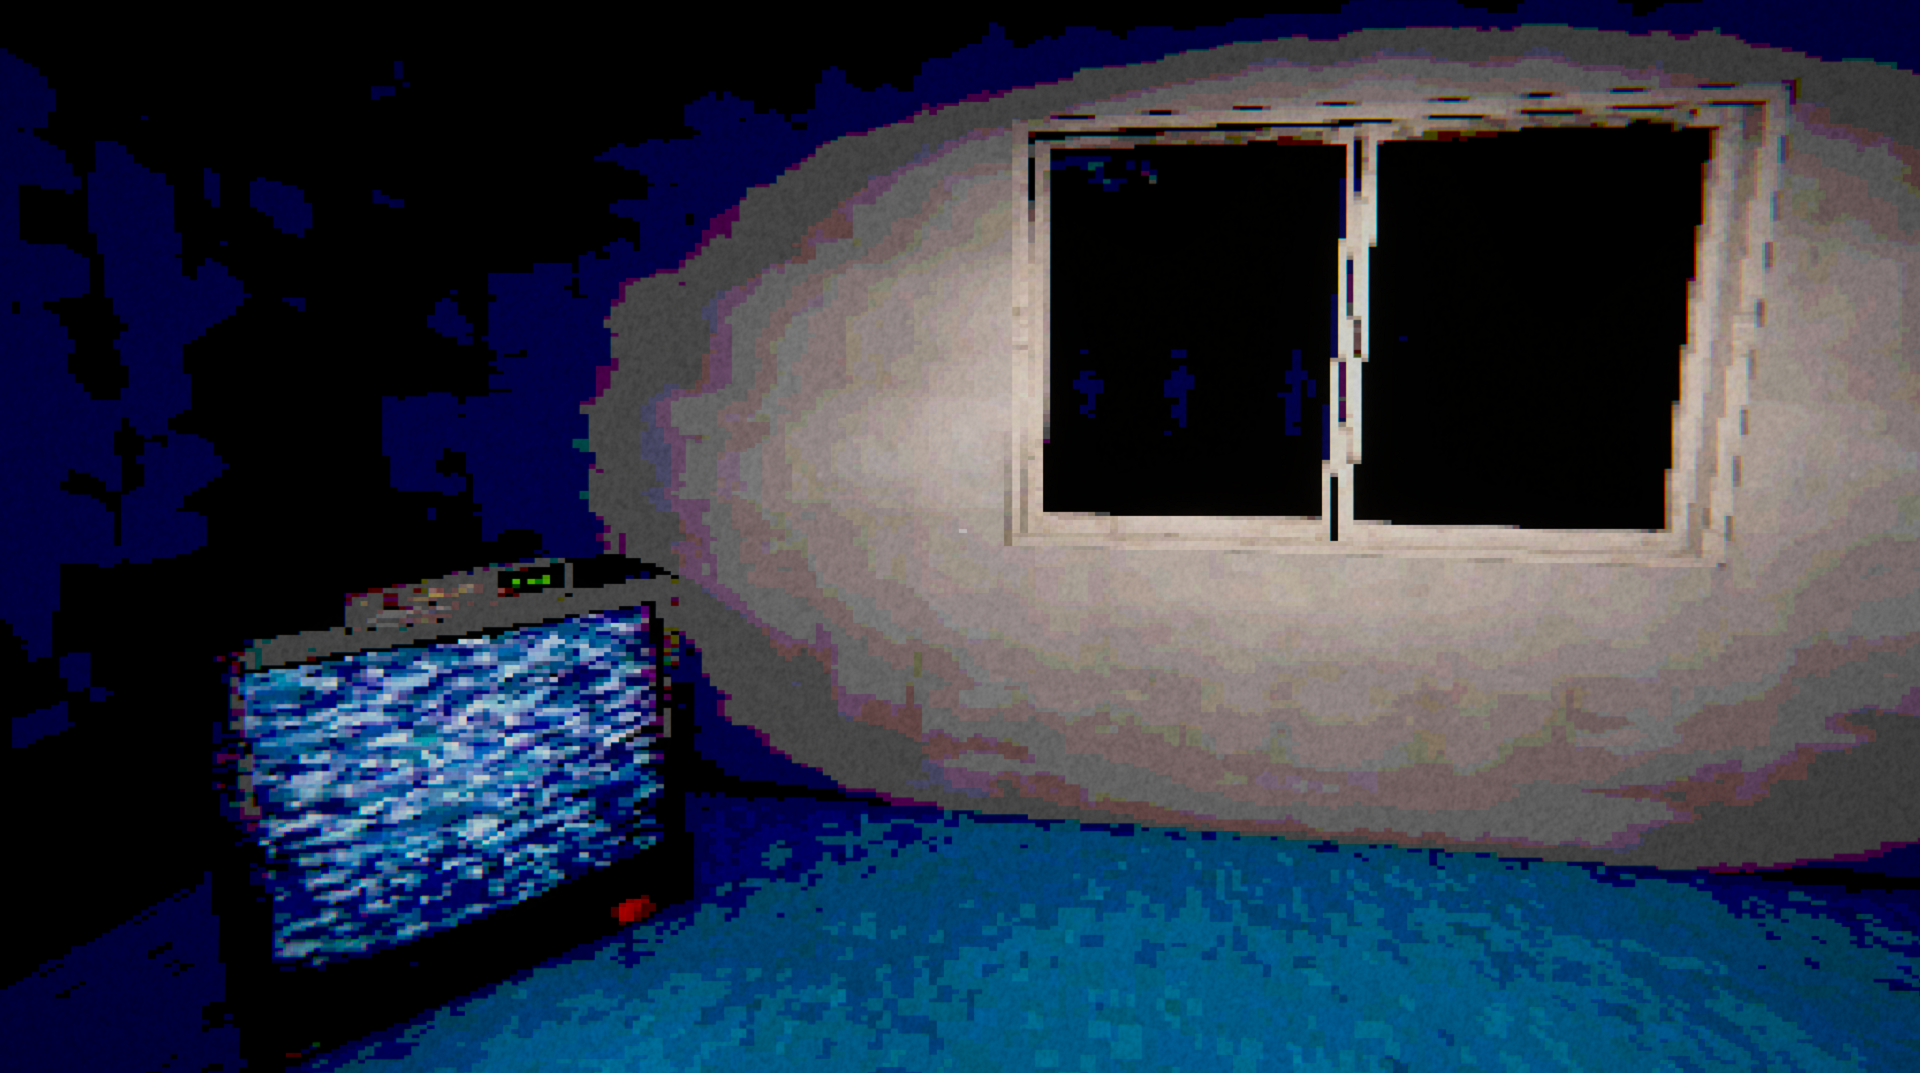 You need to save your son in Mimic, but one look at the eerie colors and smeared shadows of this place make it feel like you've already lost him before the game starts.